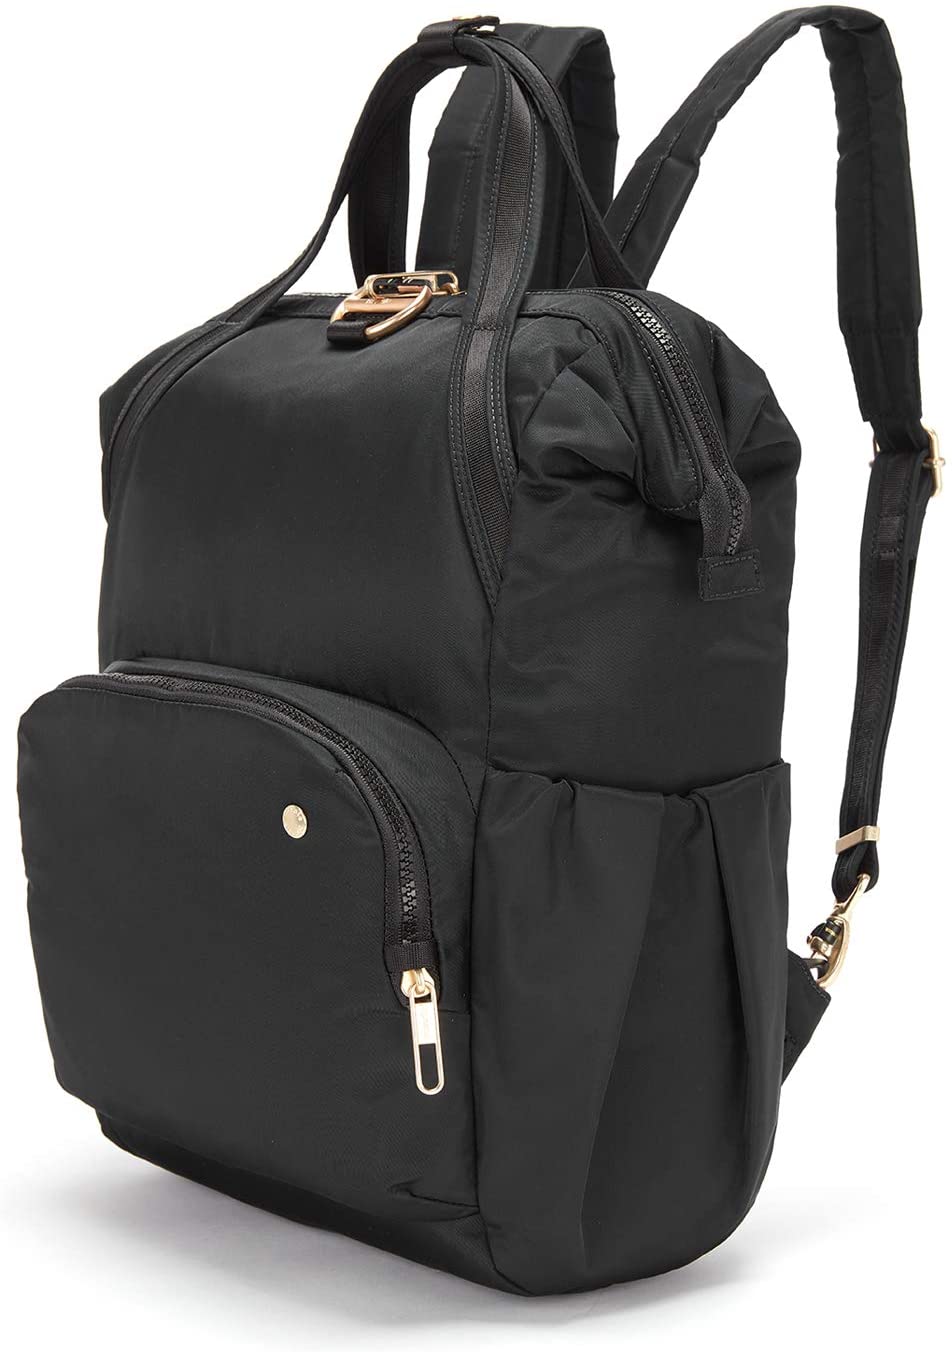 travel-bag-with-laptop-compartment